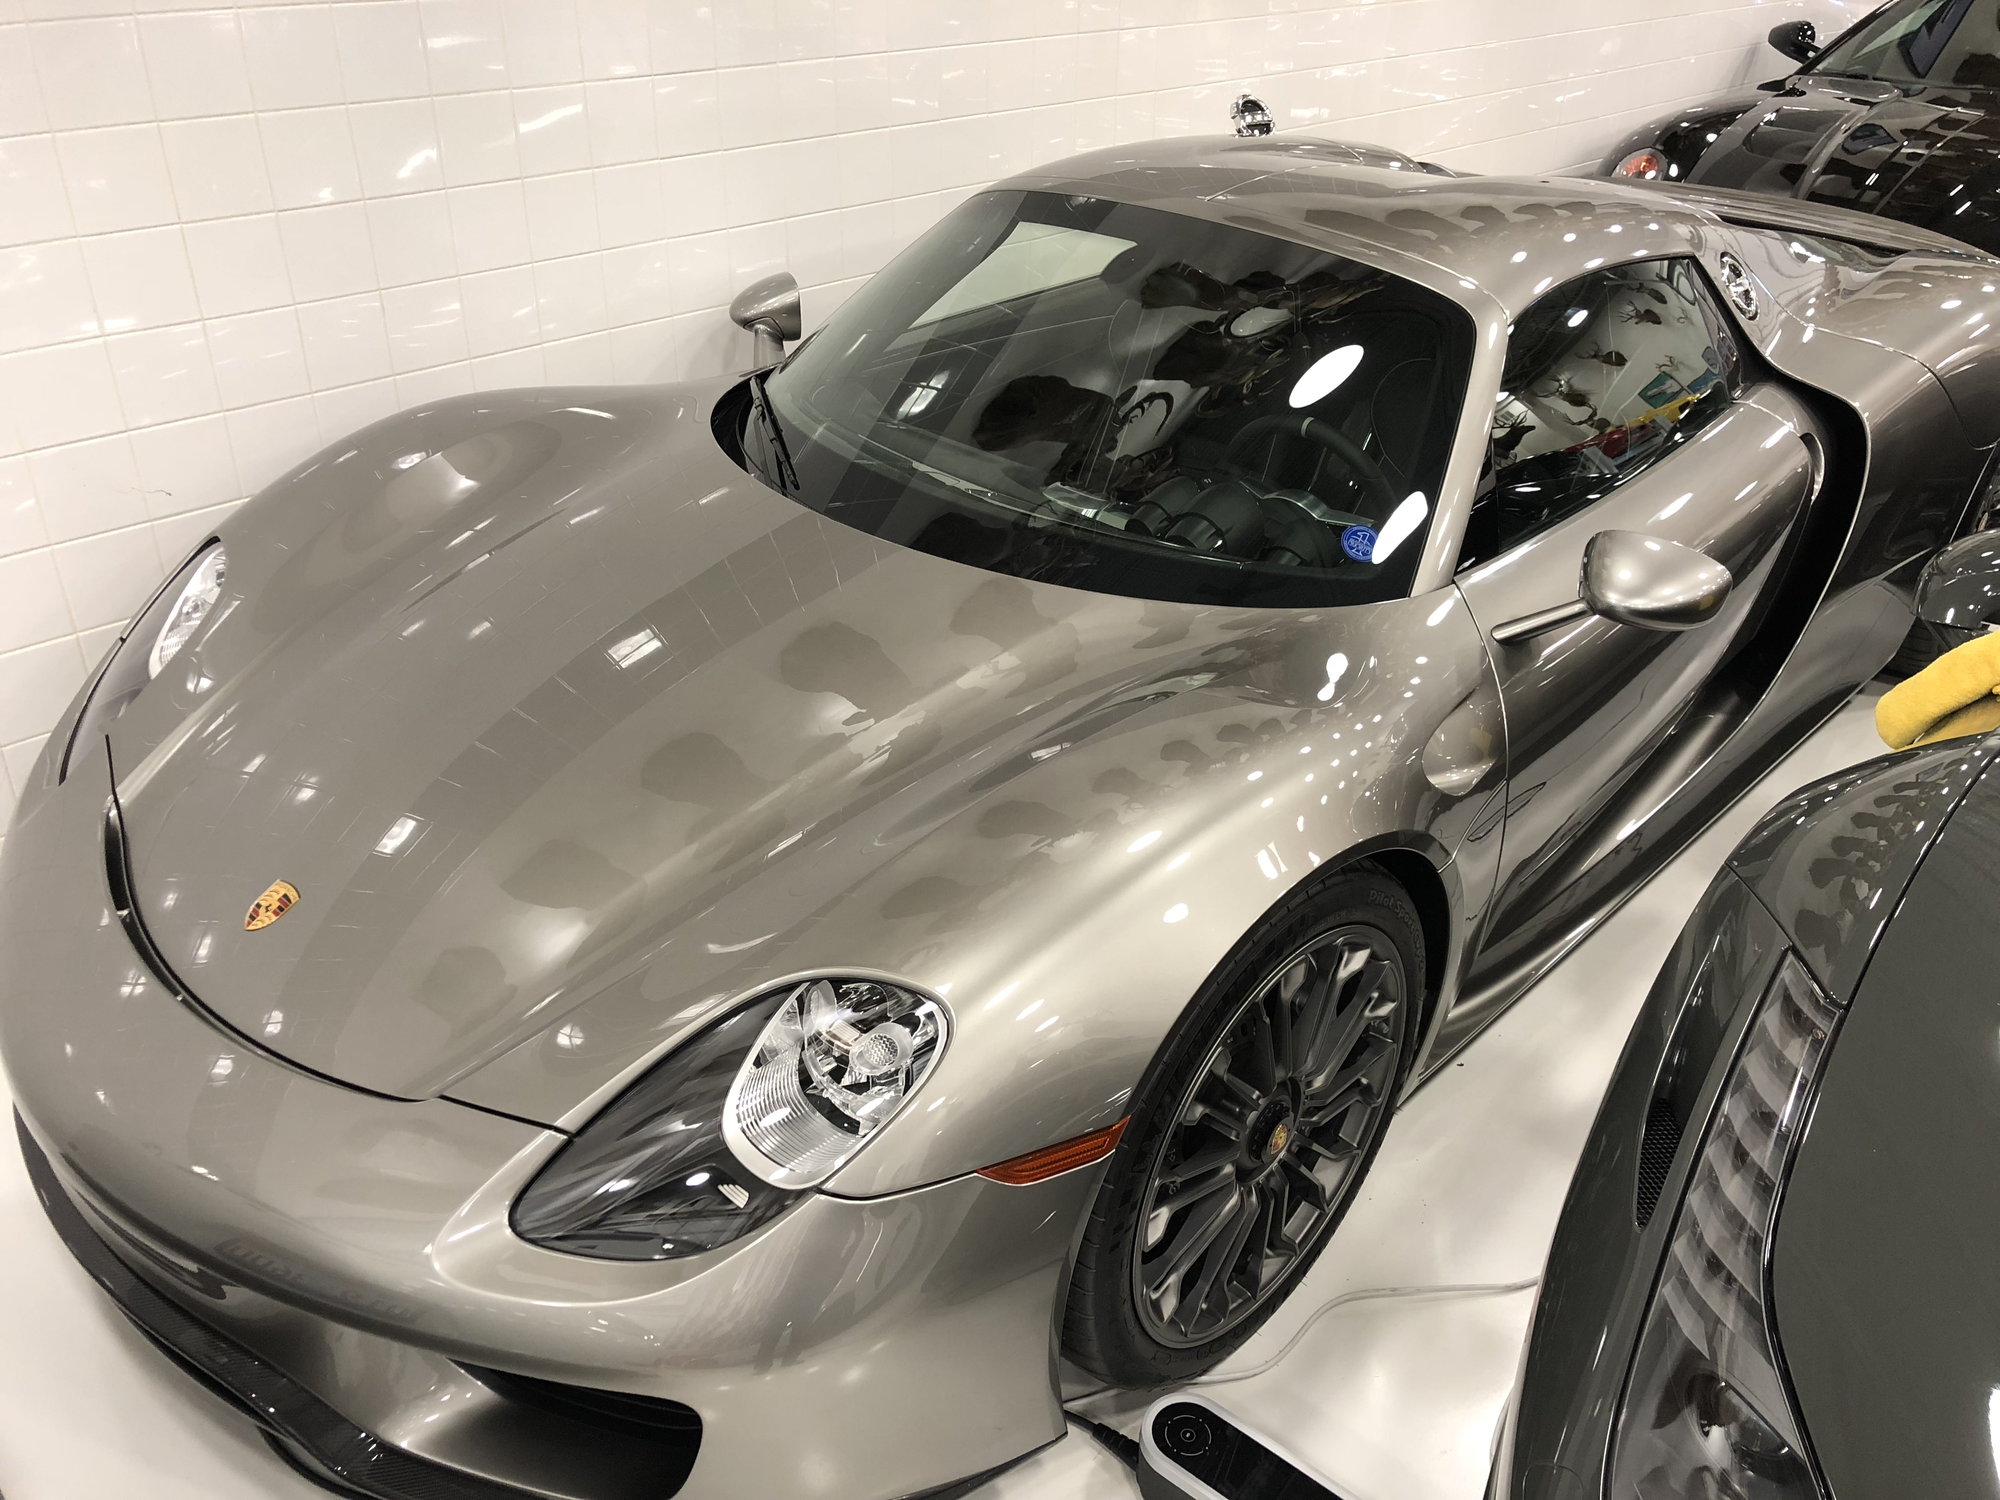 2015 Porsche 918 Spyder - 2015 Porsche 918 Spyder Liquid Metal Silver Only 119 Miles Original Owner No.373 - Used - VIN WP0CA2A12FS800373 - 119 Miles - 8 cyl - AWD - Convertible - Silver - Champaign, IL 61820, United States